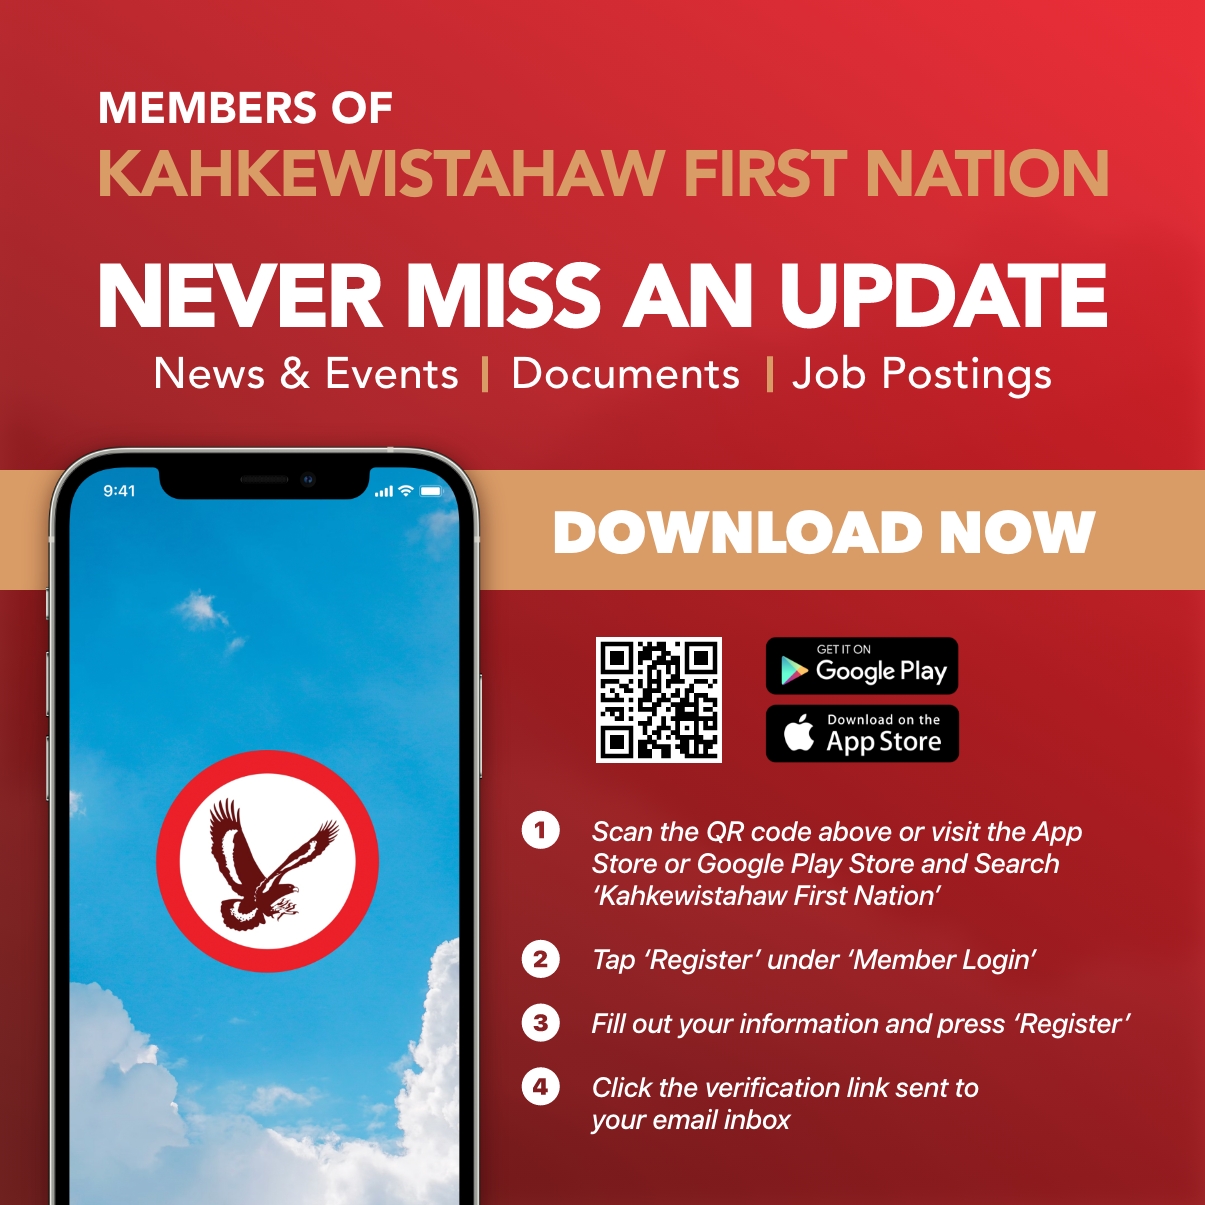 The Official Kahkewistahaw First Nation App displayed on an iPhone. Scannable QR code included.